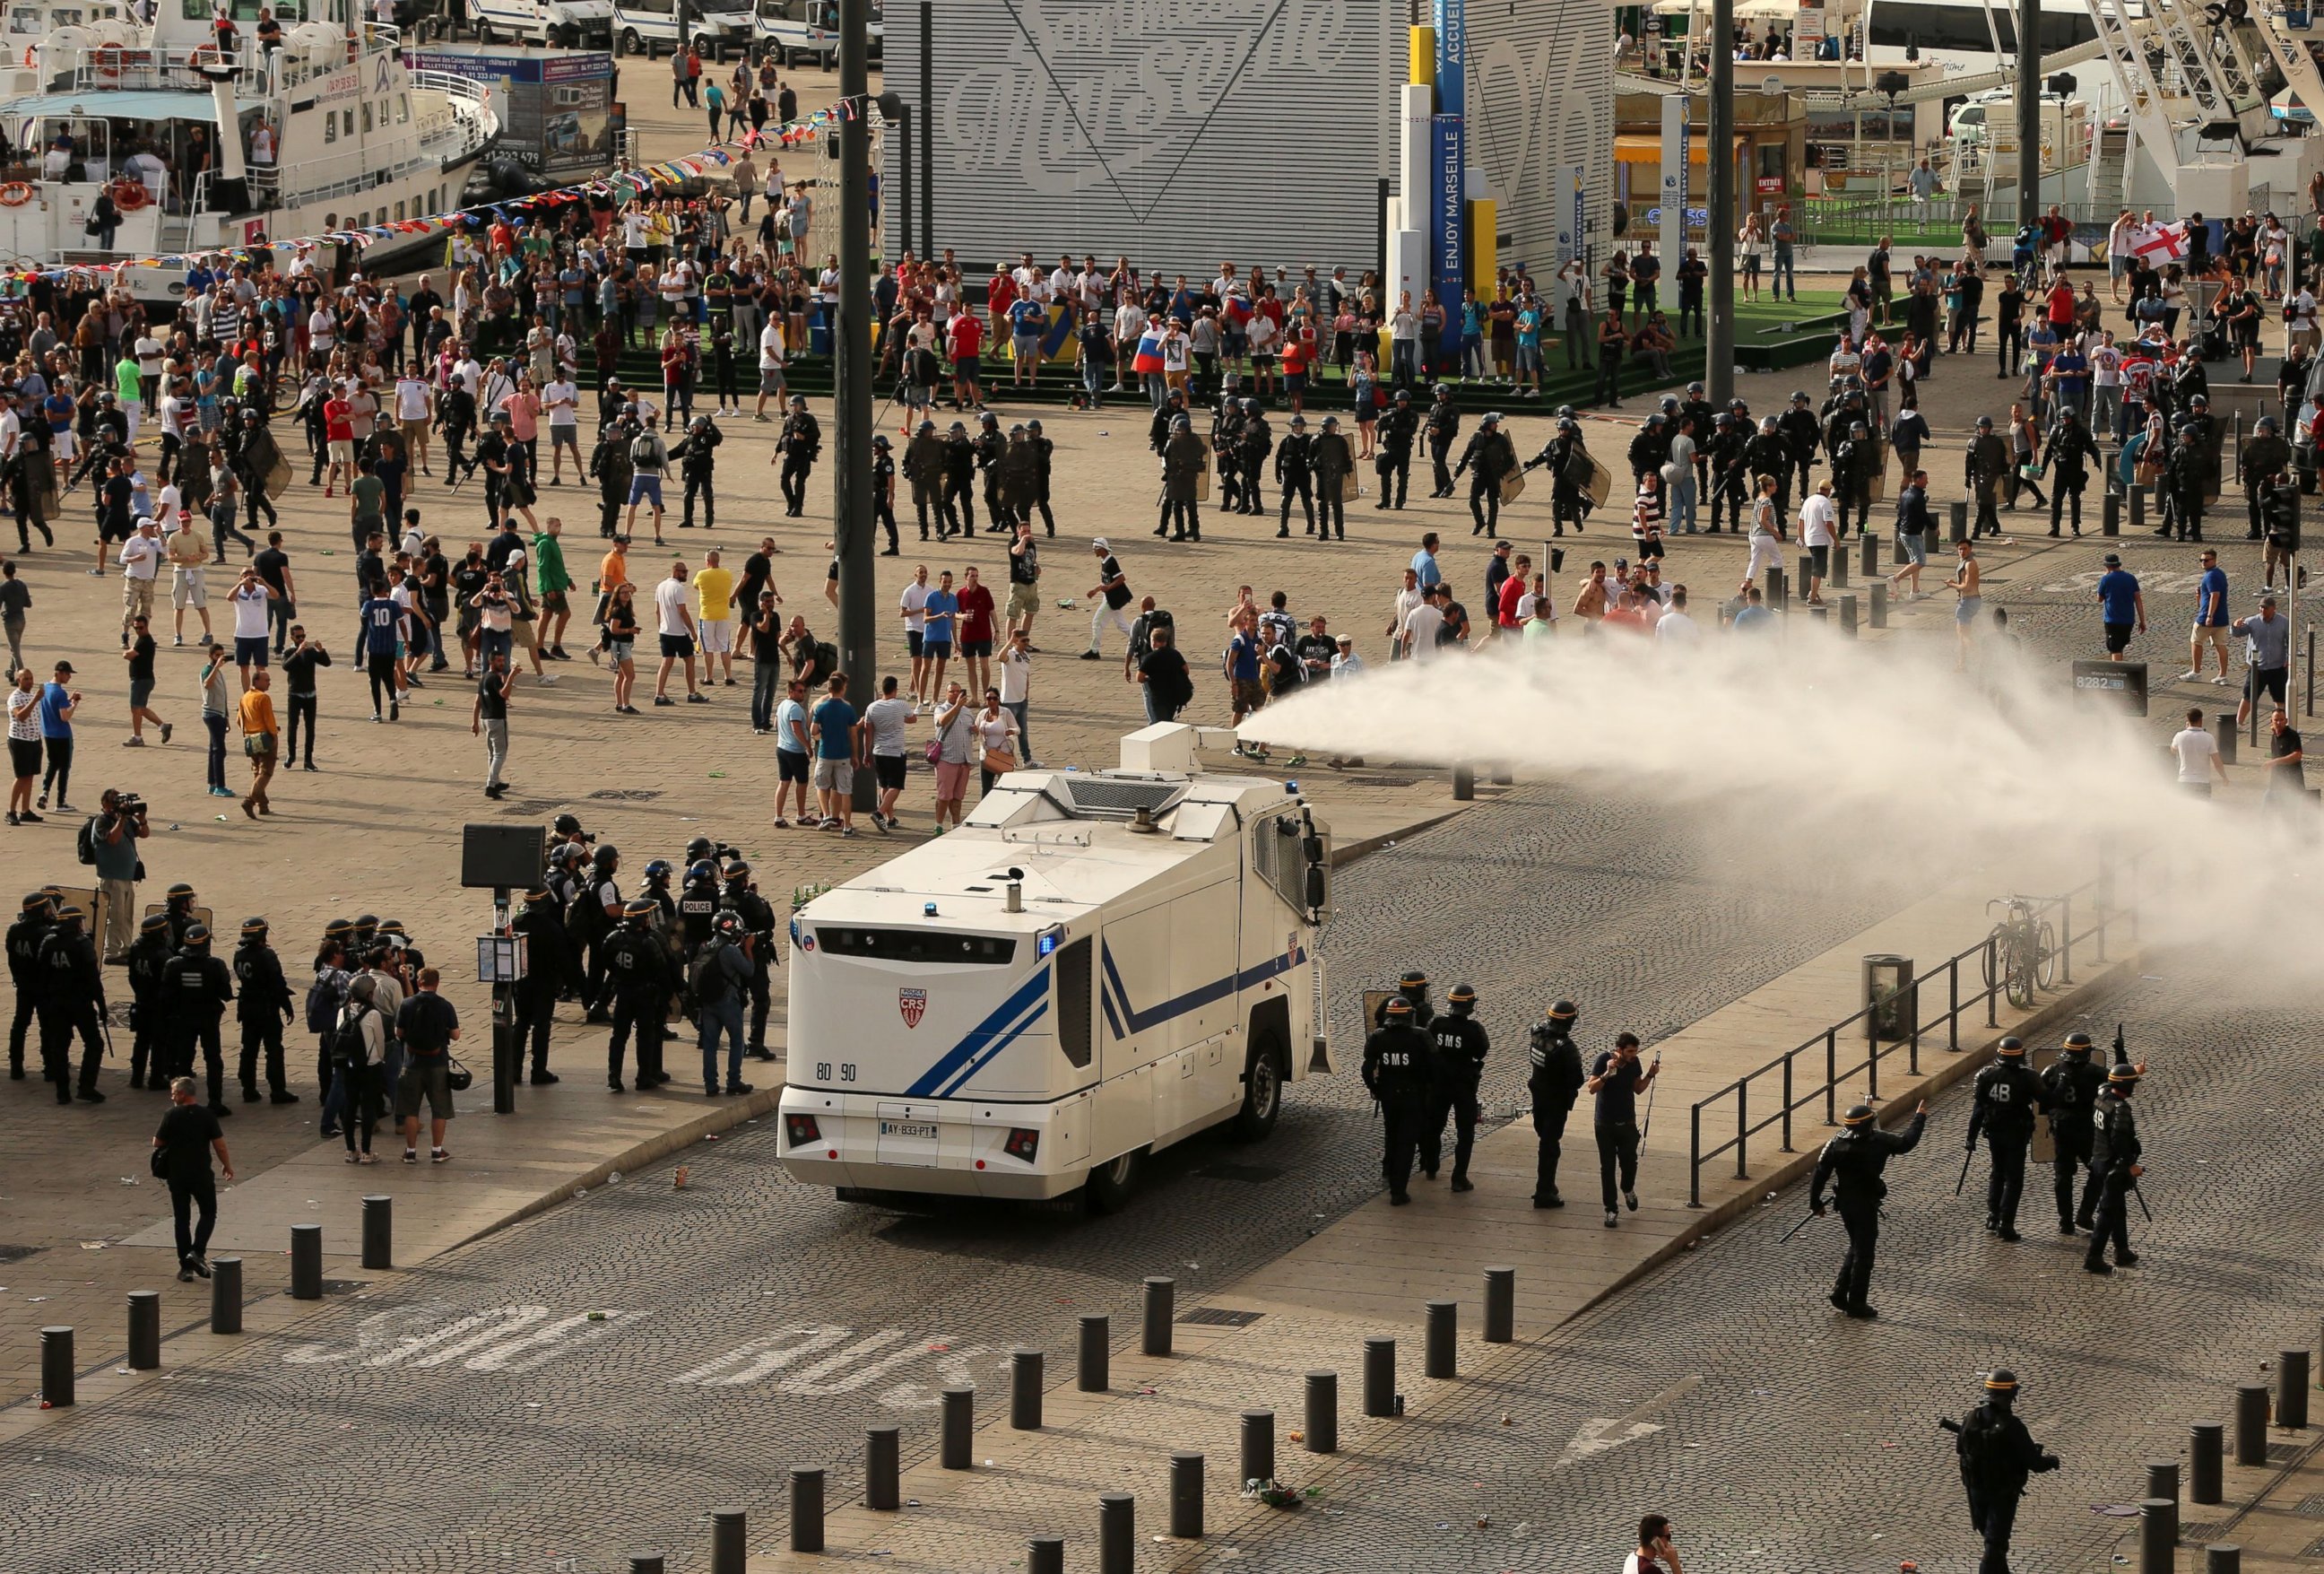 PHOTO: Police fire water cannons to control the fighting after football fans clashed ahead of the England v Russia Euro 2016 soccer match, in Marseille, France, June 11, 2016.